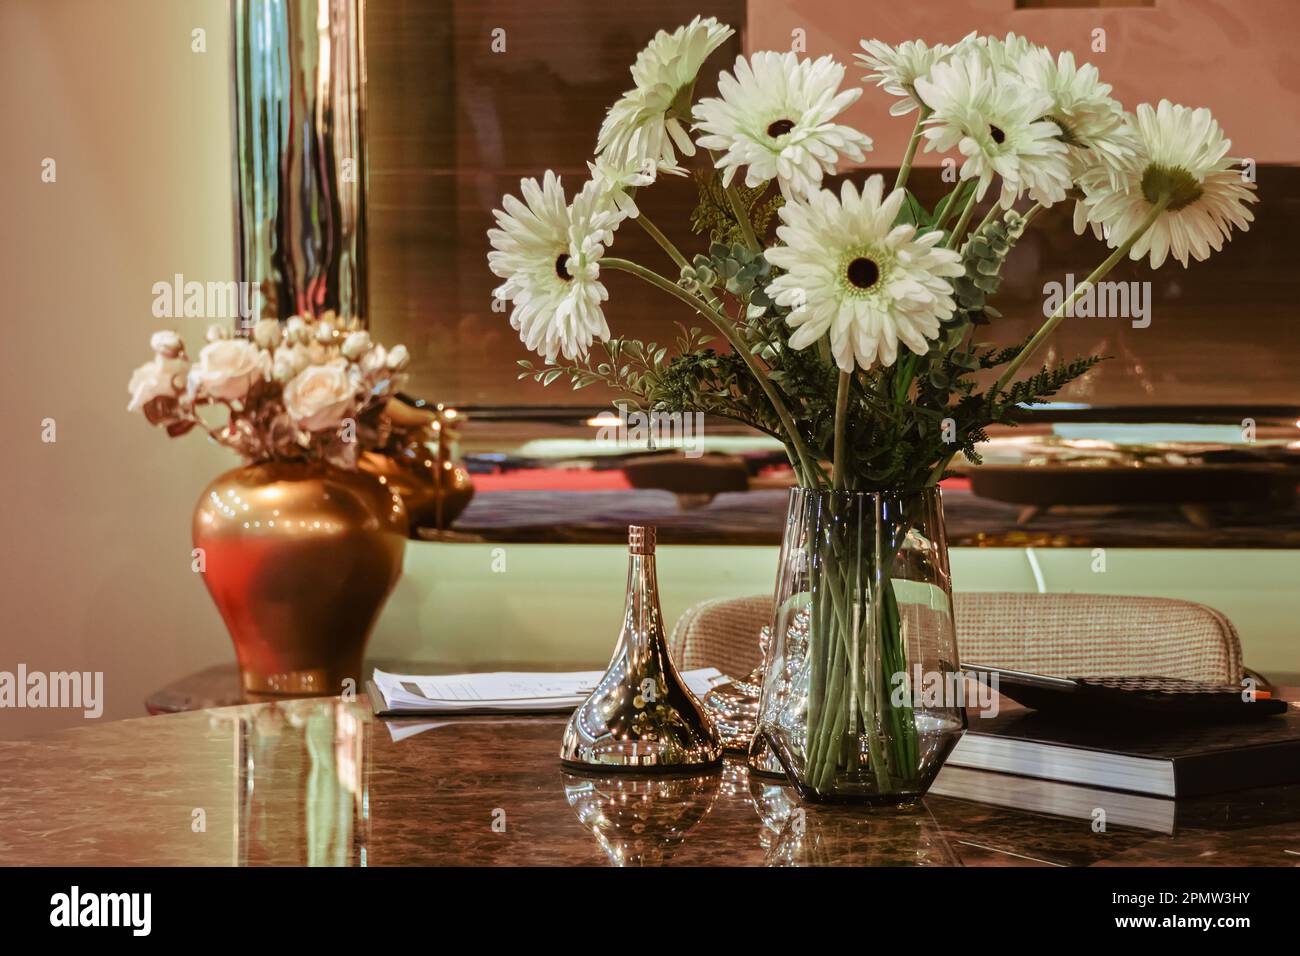 White gerberas in a vase near the mirror stand on the table. Stock Photo